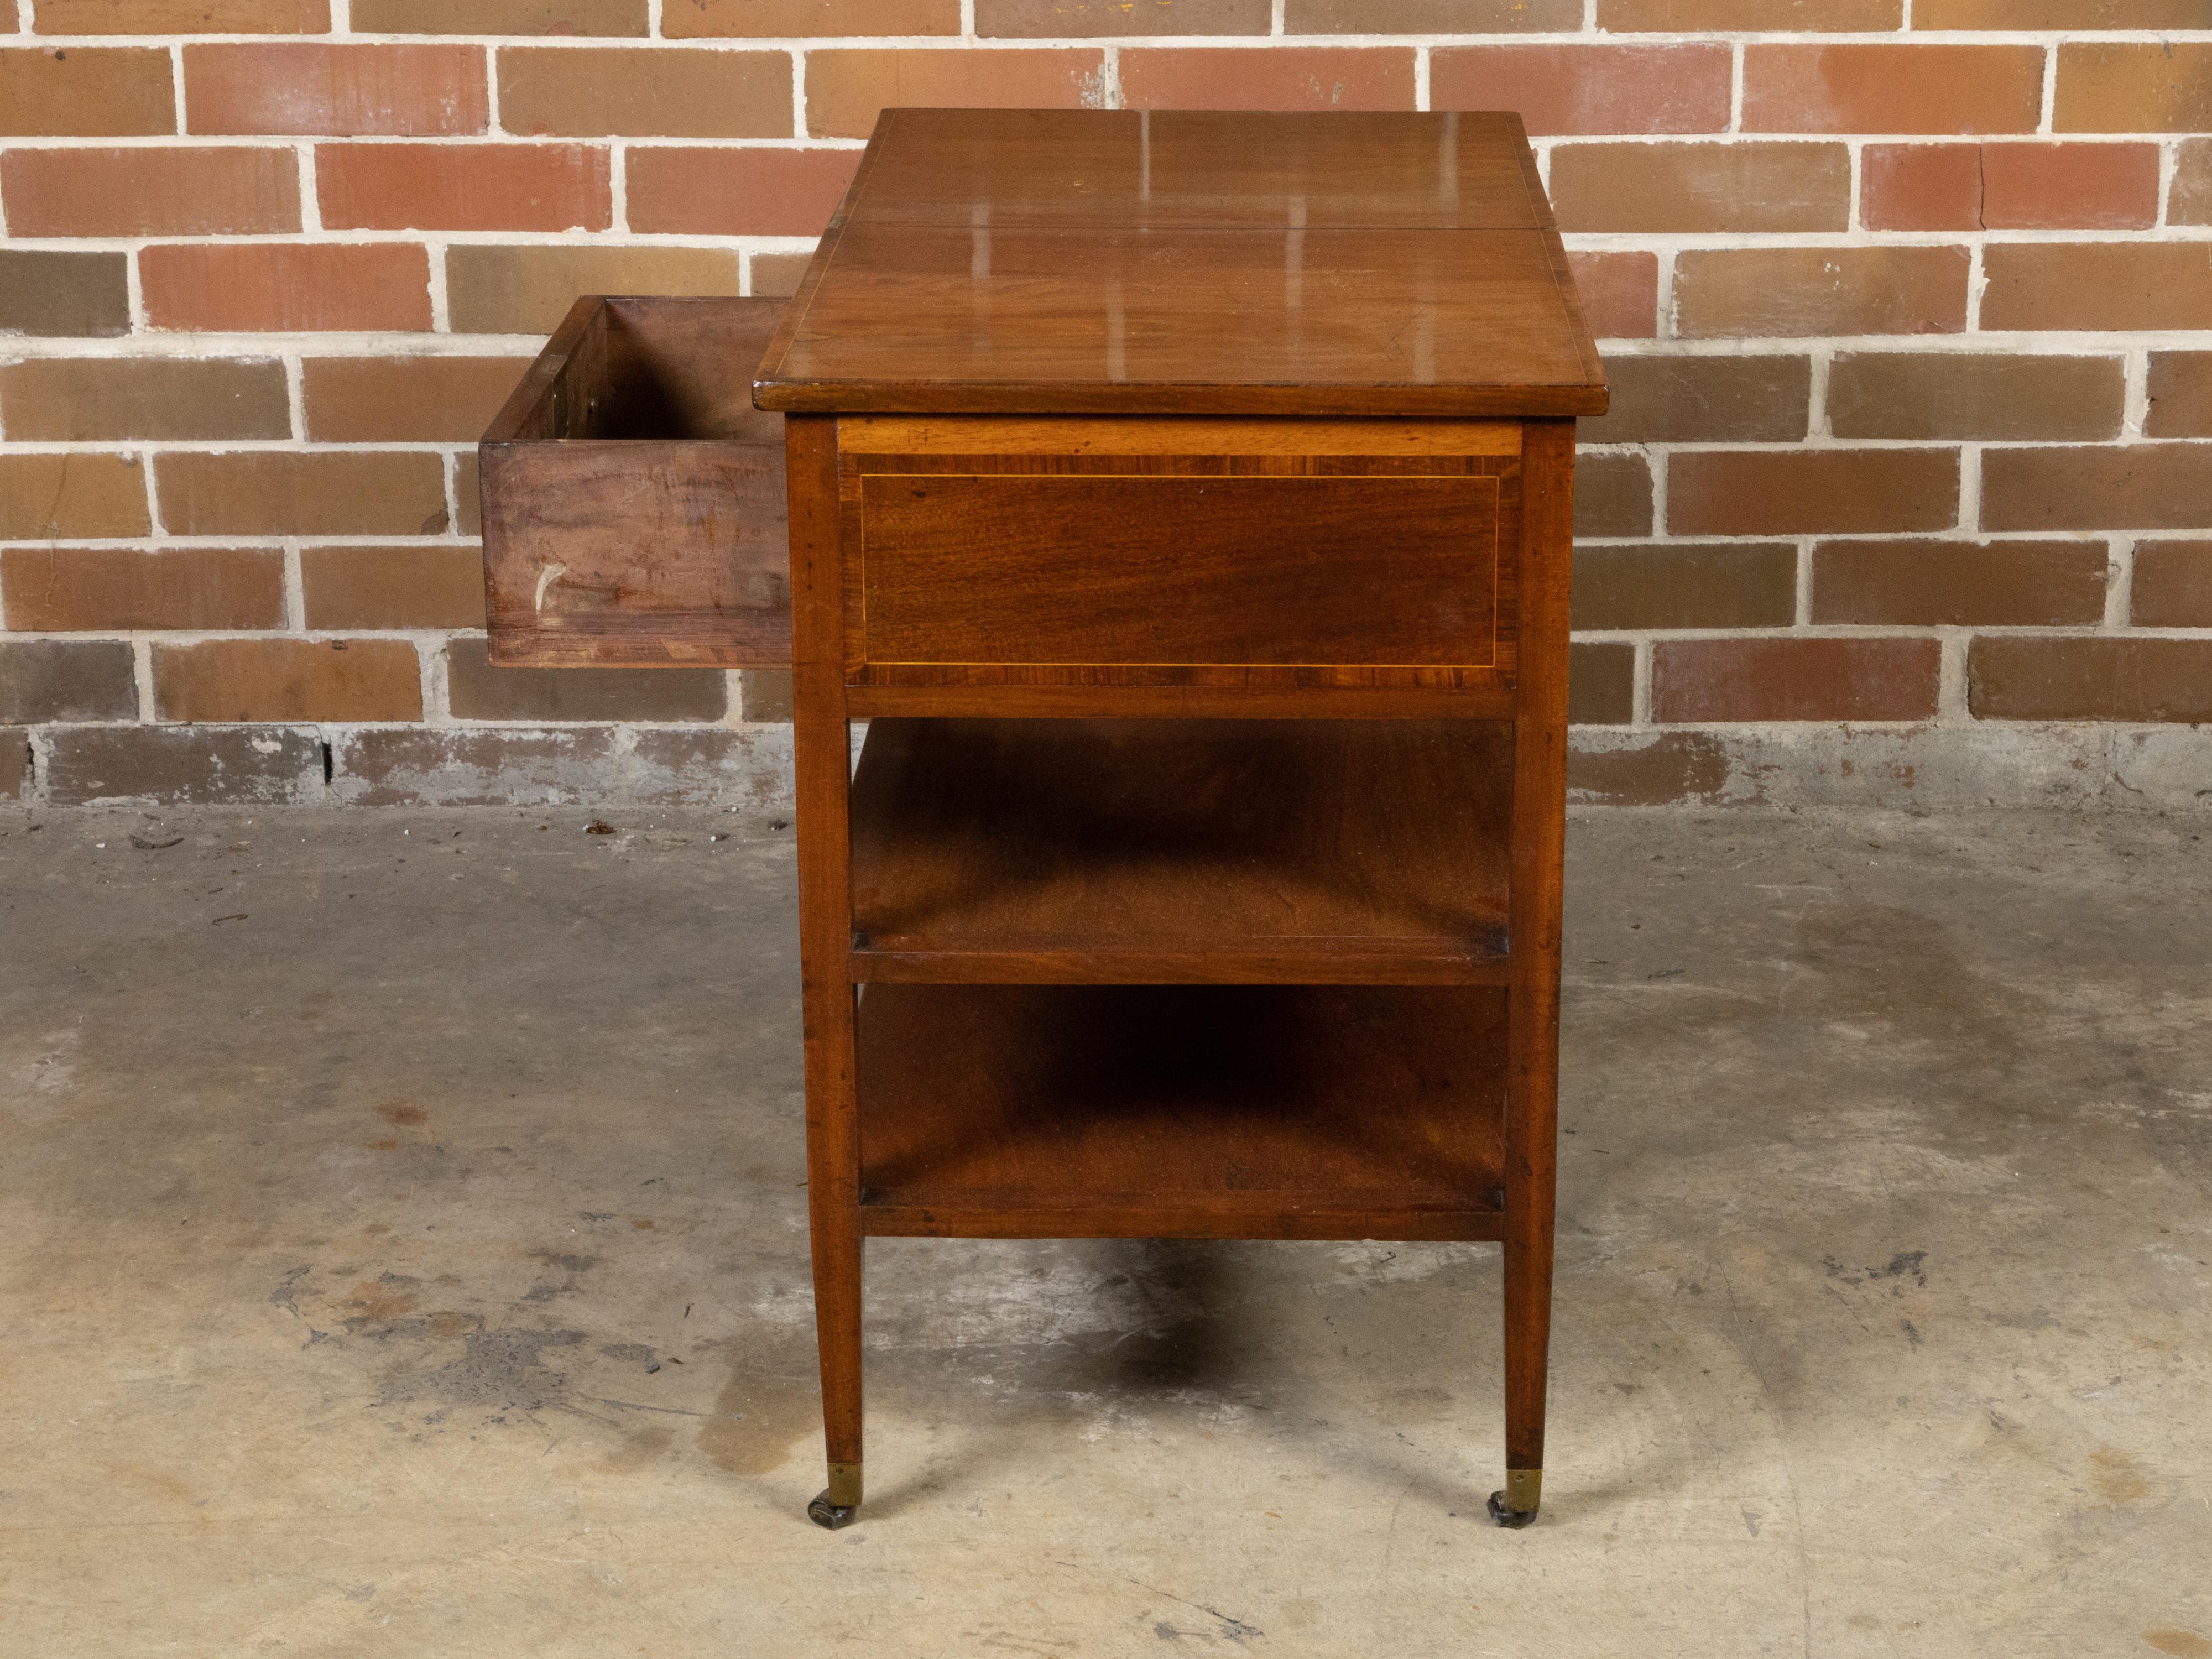 English 19th Century Metamorphic Table with Lift Top, Drawers and Shelves For Sale 8